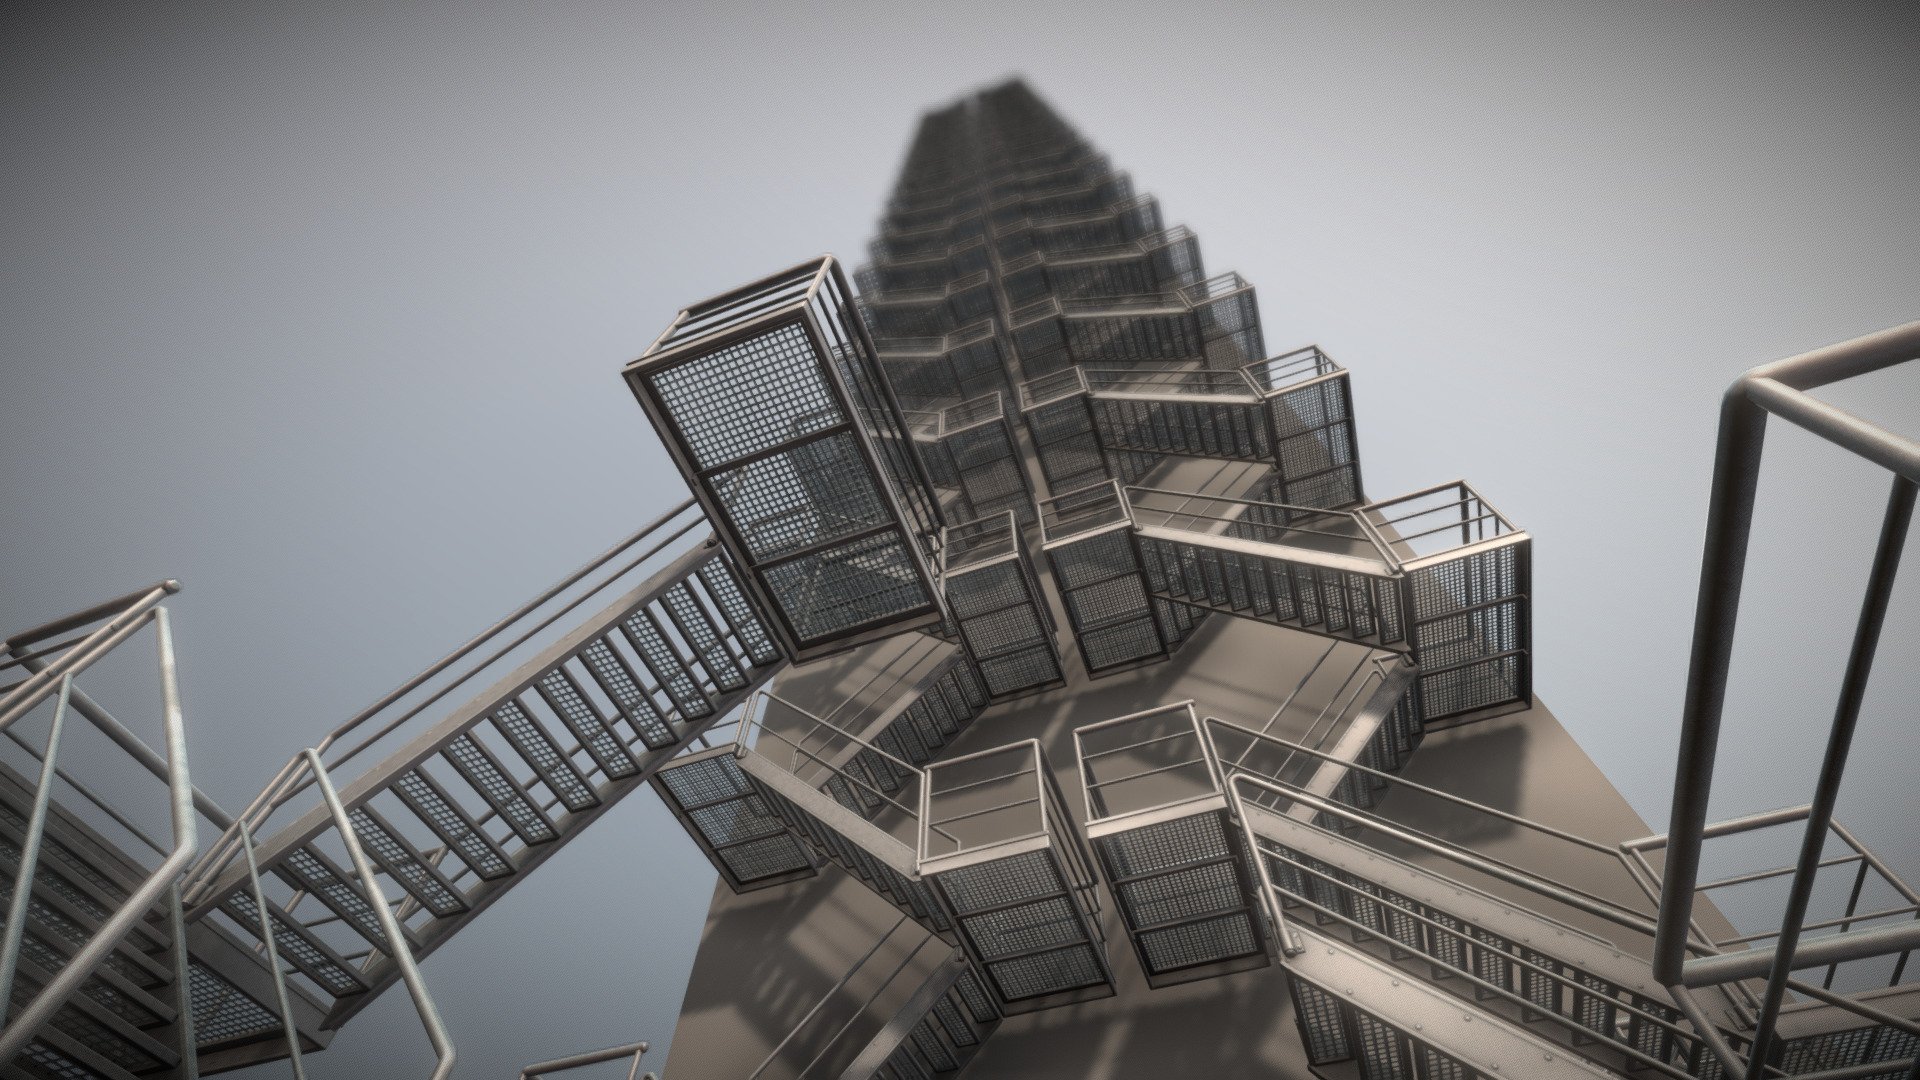 Industrial Staircase Low-Poly (Galvanized Steel).



Some other versions of this staircase:




Modular Industrial Staircase Rusty (Low-Poly)

Modular Industrial Staircase Rusty (High-Poly)

Modular Industrial Staircase Basic Version (High-Poly)

Industrial Staircase High-Poly (Galvanized)

Industrial Staircase Low-Poly (Galvanized)

Modeled and textured in Blender 2.8 - Industrial Staircase Low-Poly (Galvanized) - Buy Royalty Free 3D model by VIS-All-3D (@VIS-All) 3d model